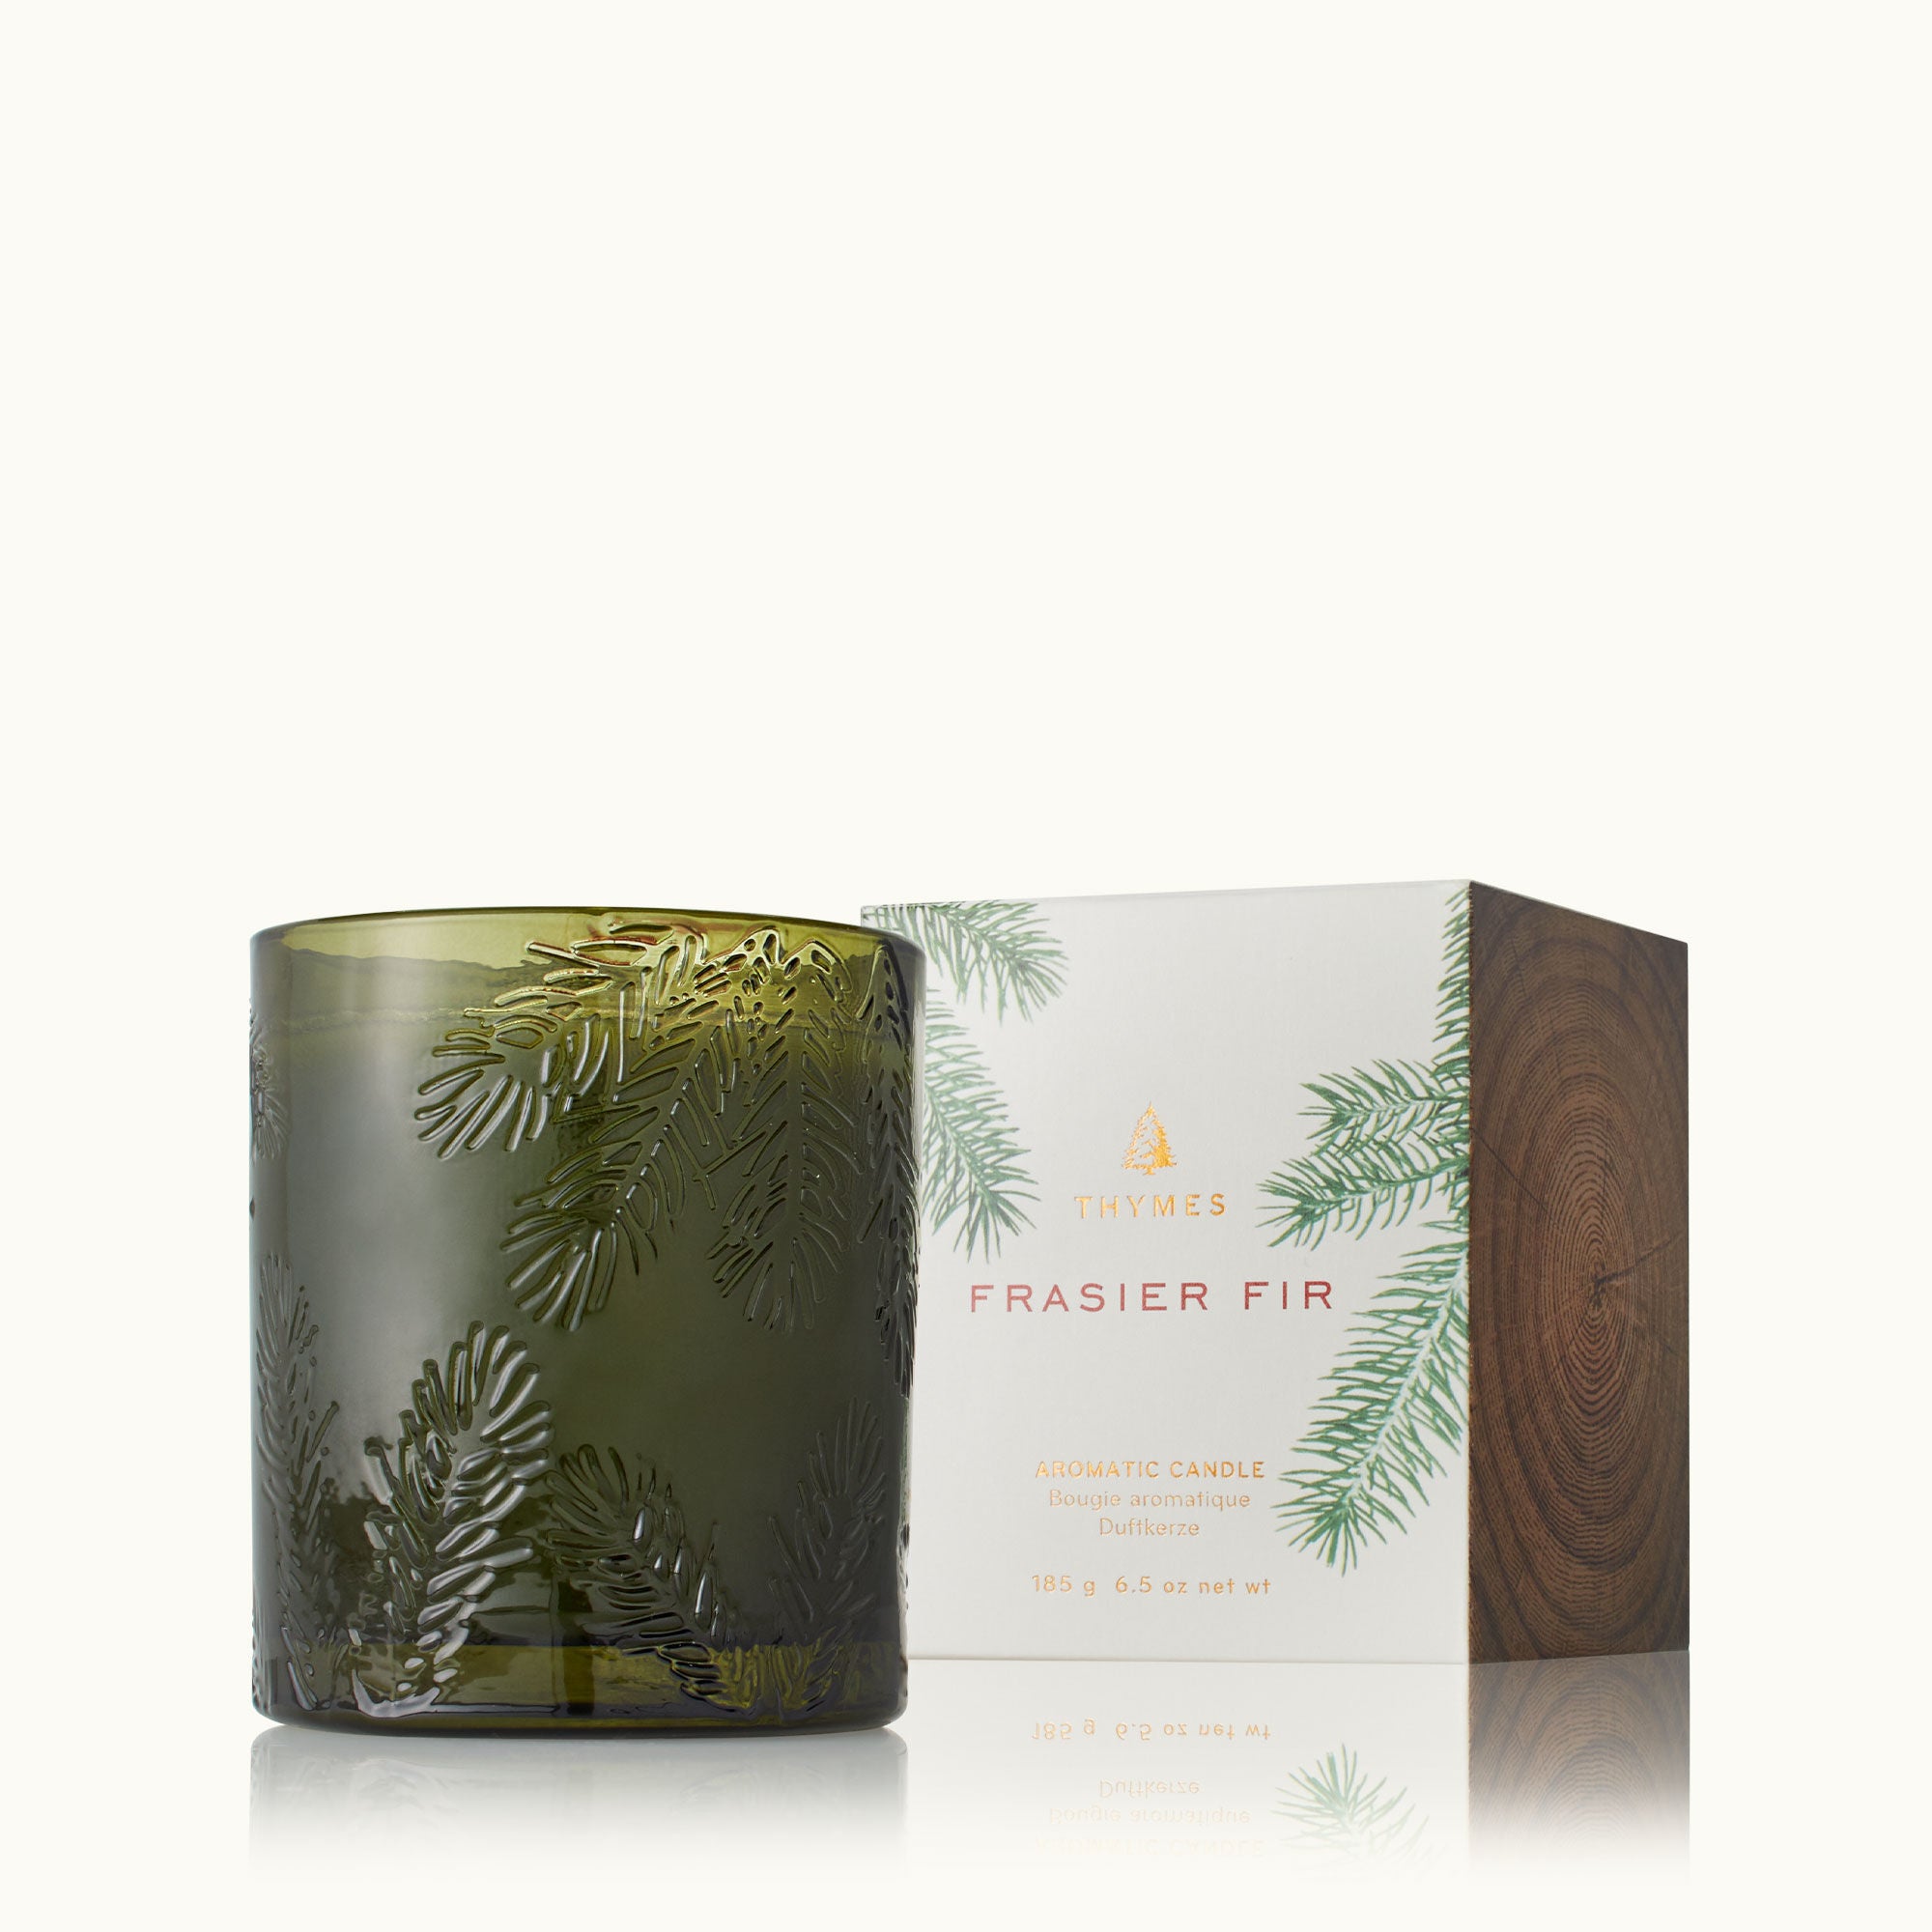 Thymes Frasier Fir Poured Candle - Molded Green Glass